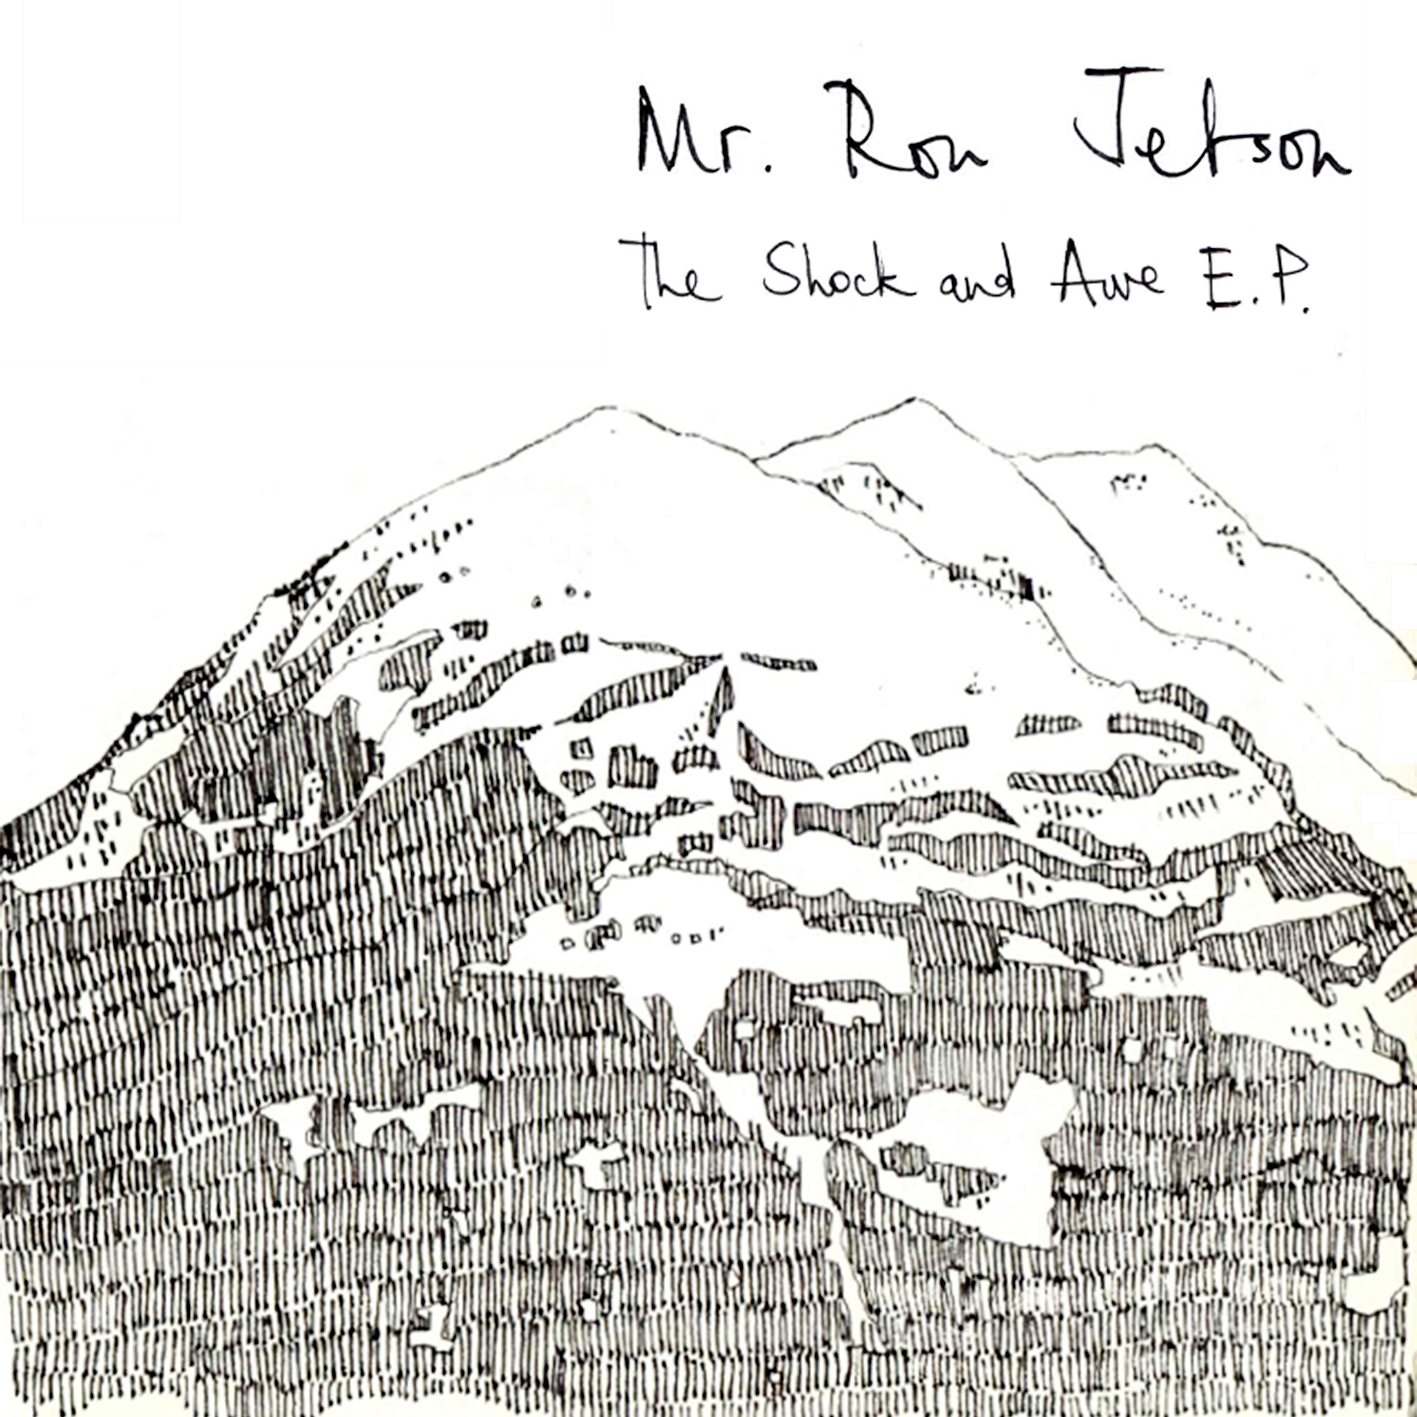 mr_ron_jetson - the_shock_and_awe_ep